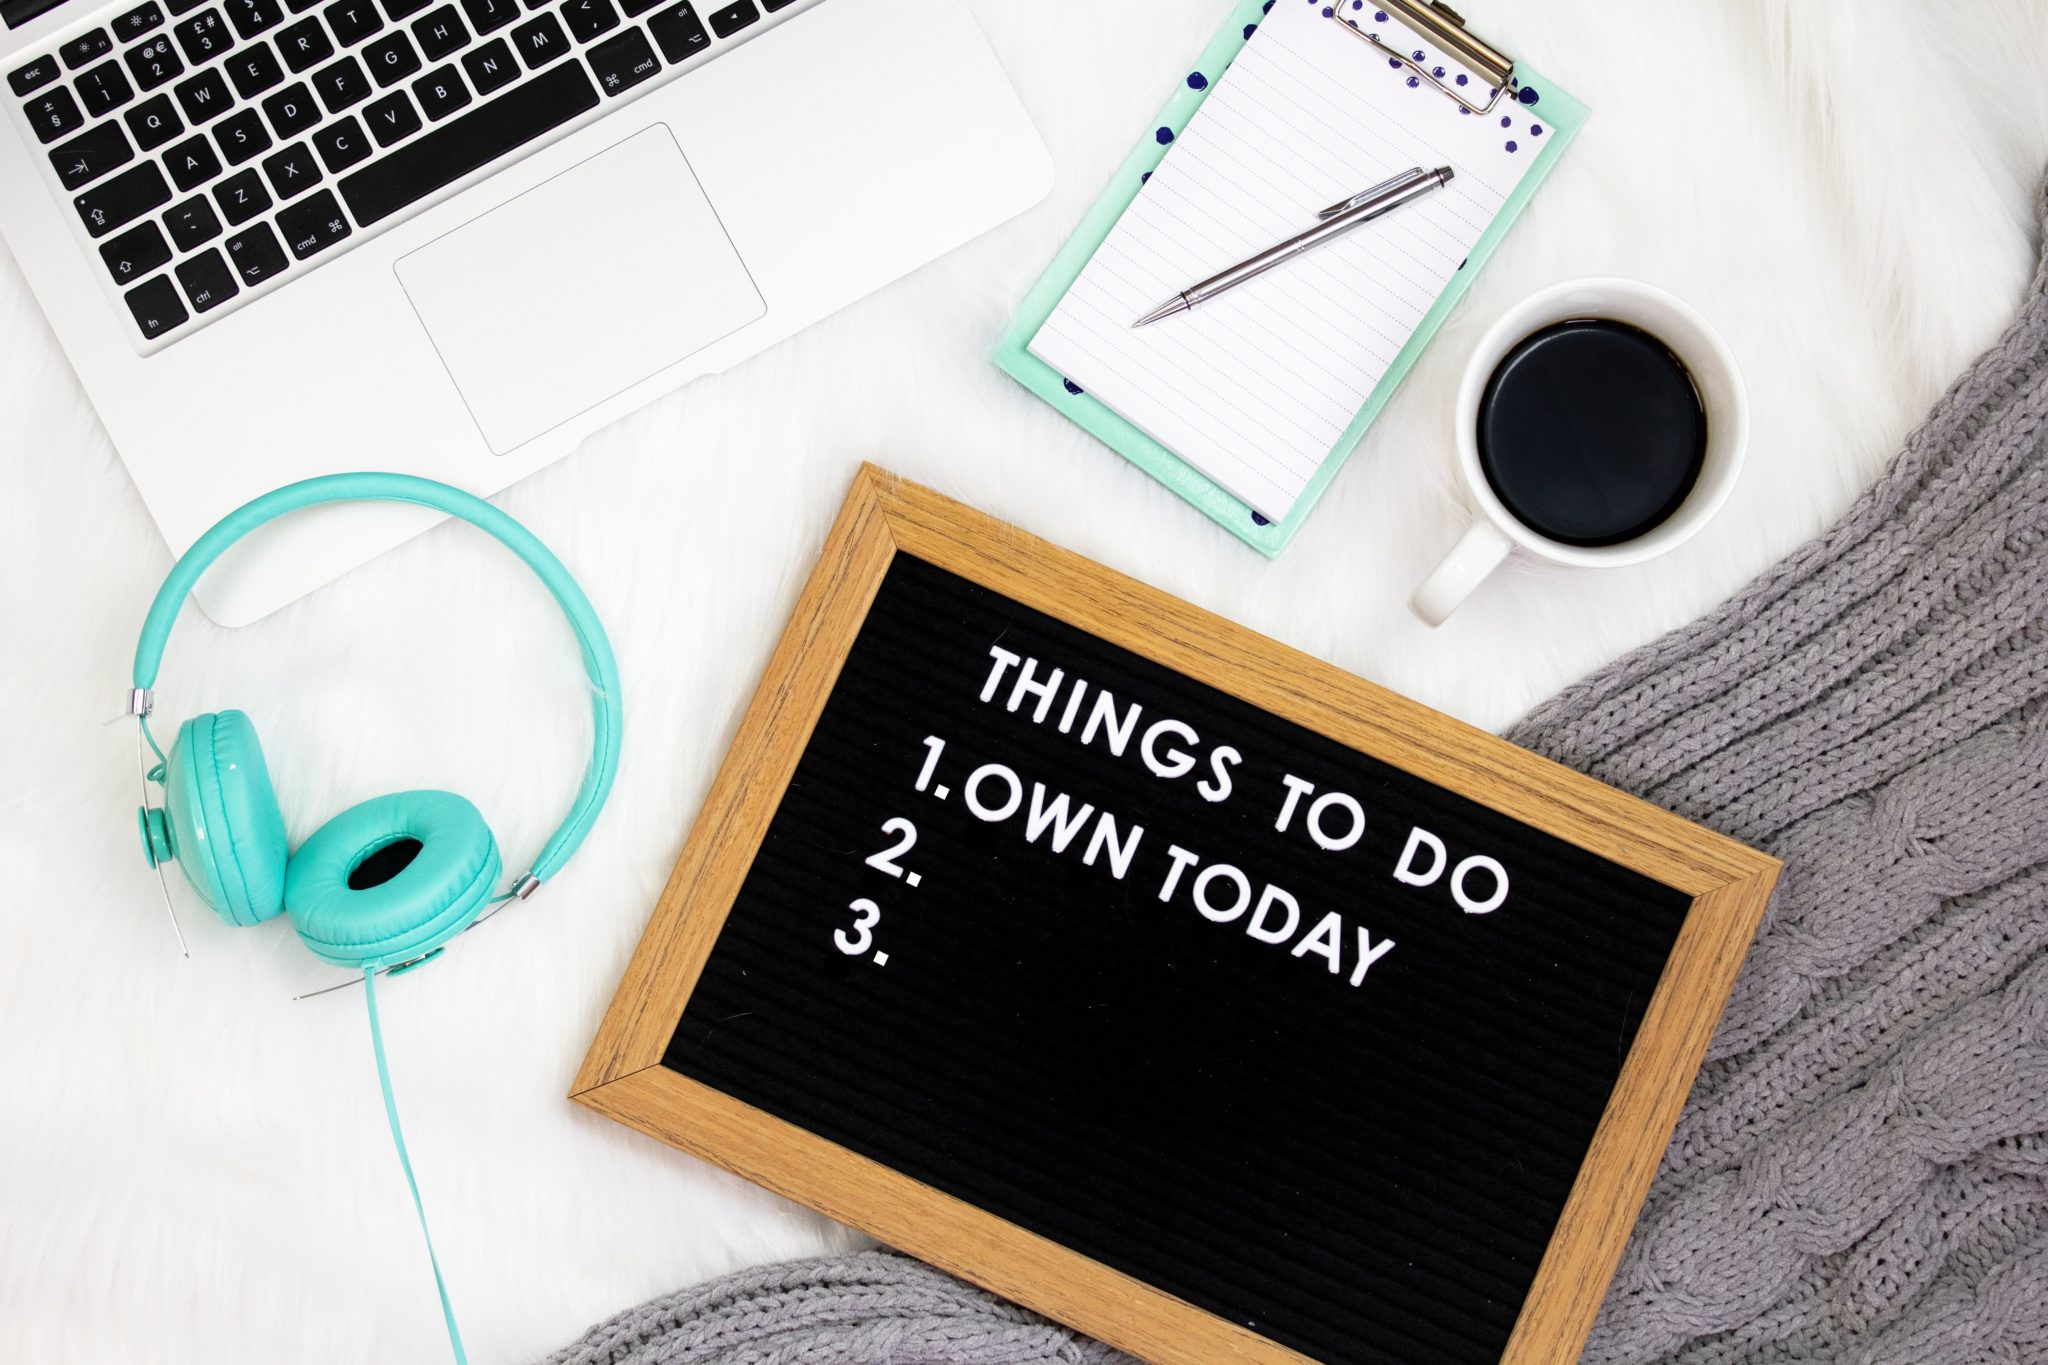 A tablet, headphones, keyboard, & little blackboard with text "Things to do: 1) Own today" with 2 & 3 blank.